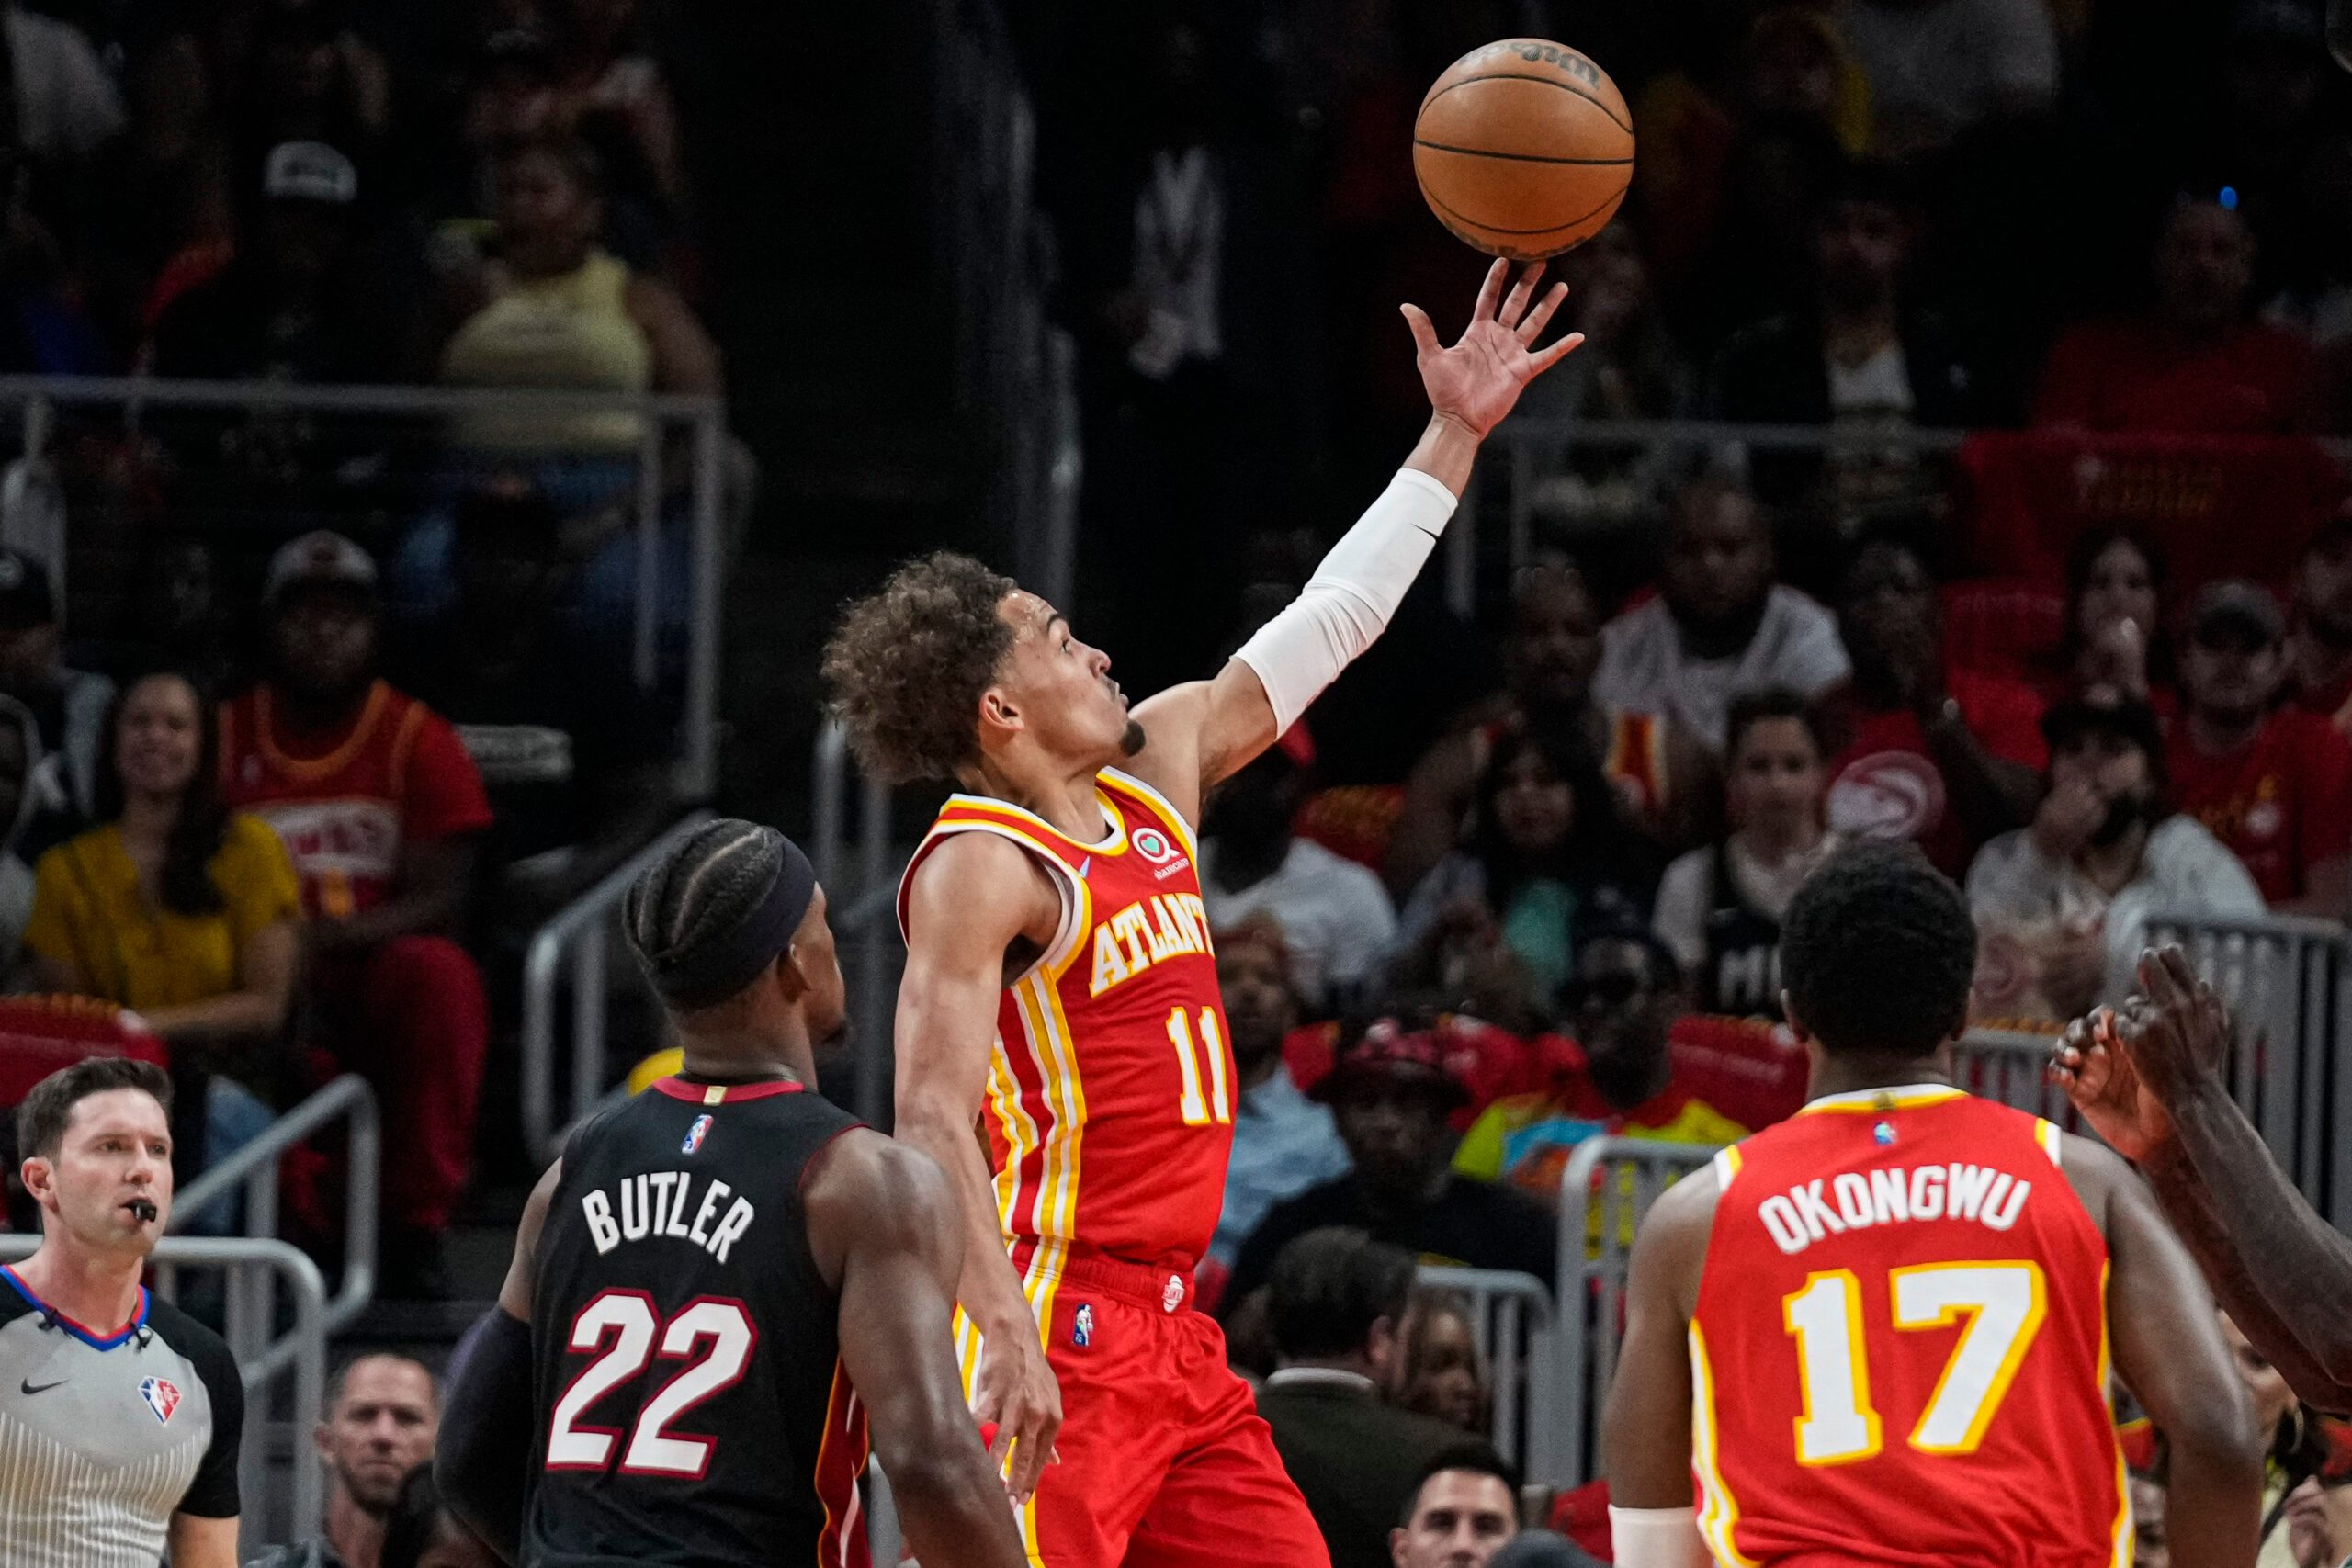 Trae Young’s late basket lifts Hawks over Heat